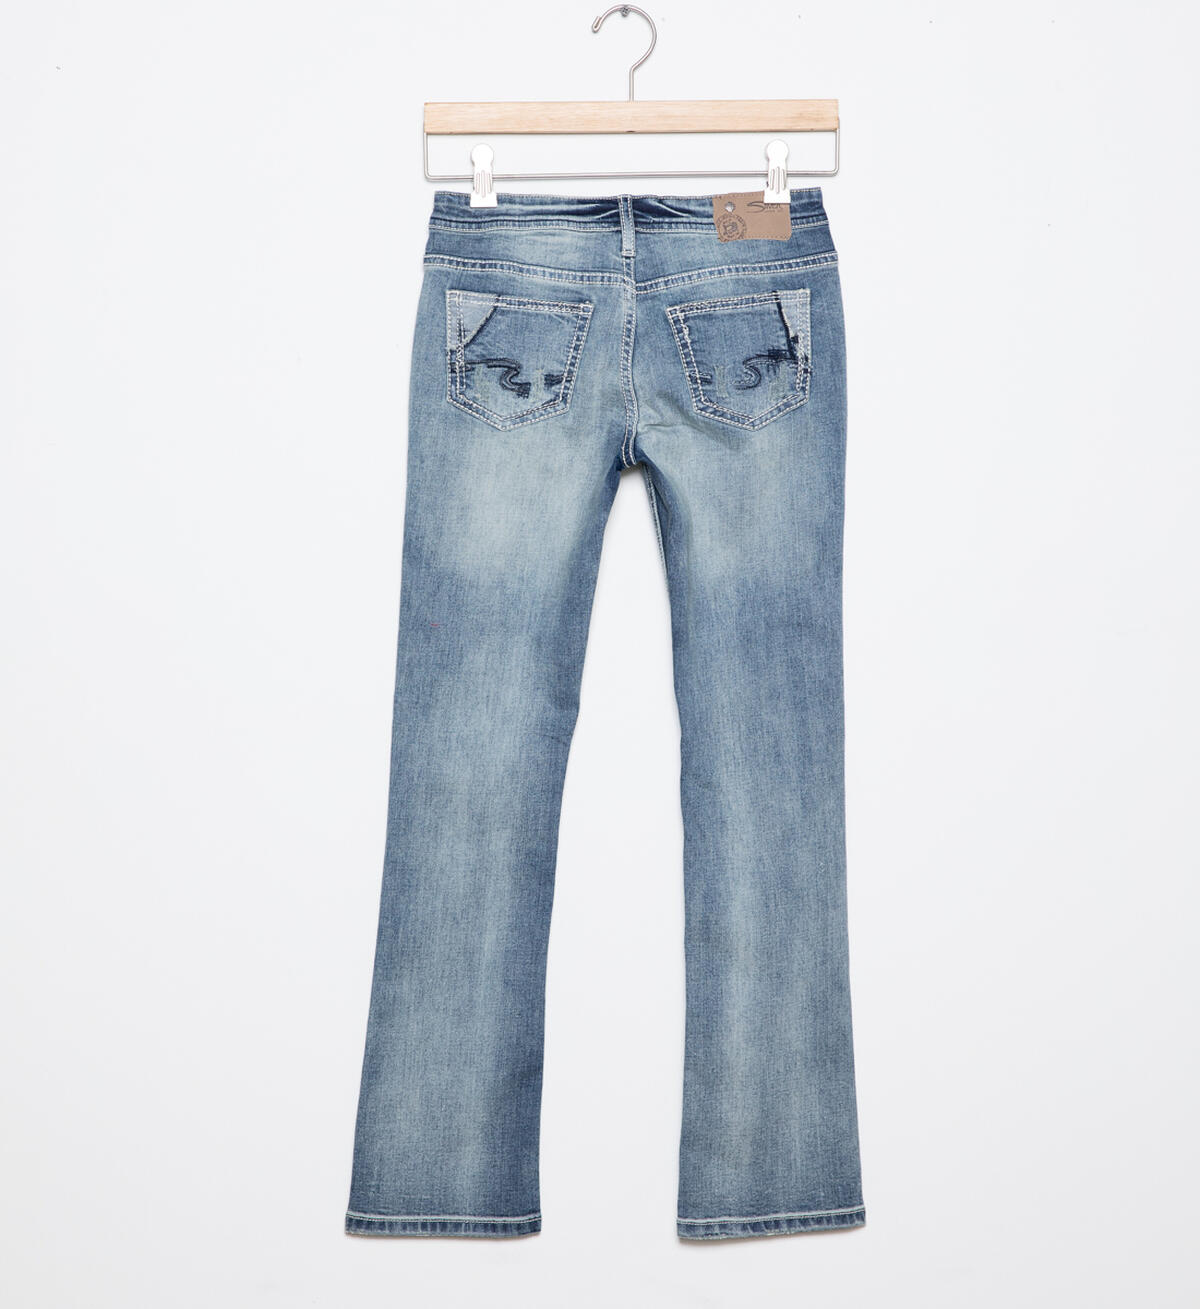 Tammy Bootcut Jeans in Medium Wash (7-16), , hi-res image number 1